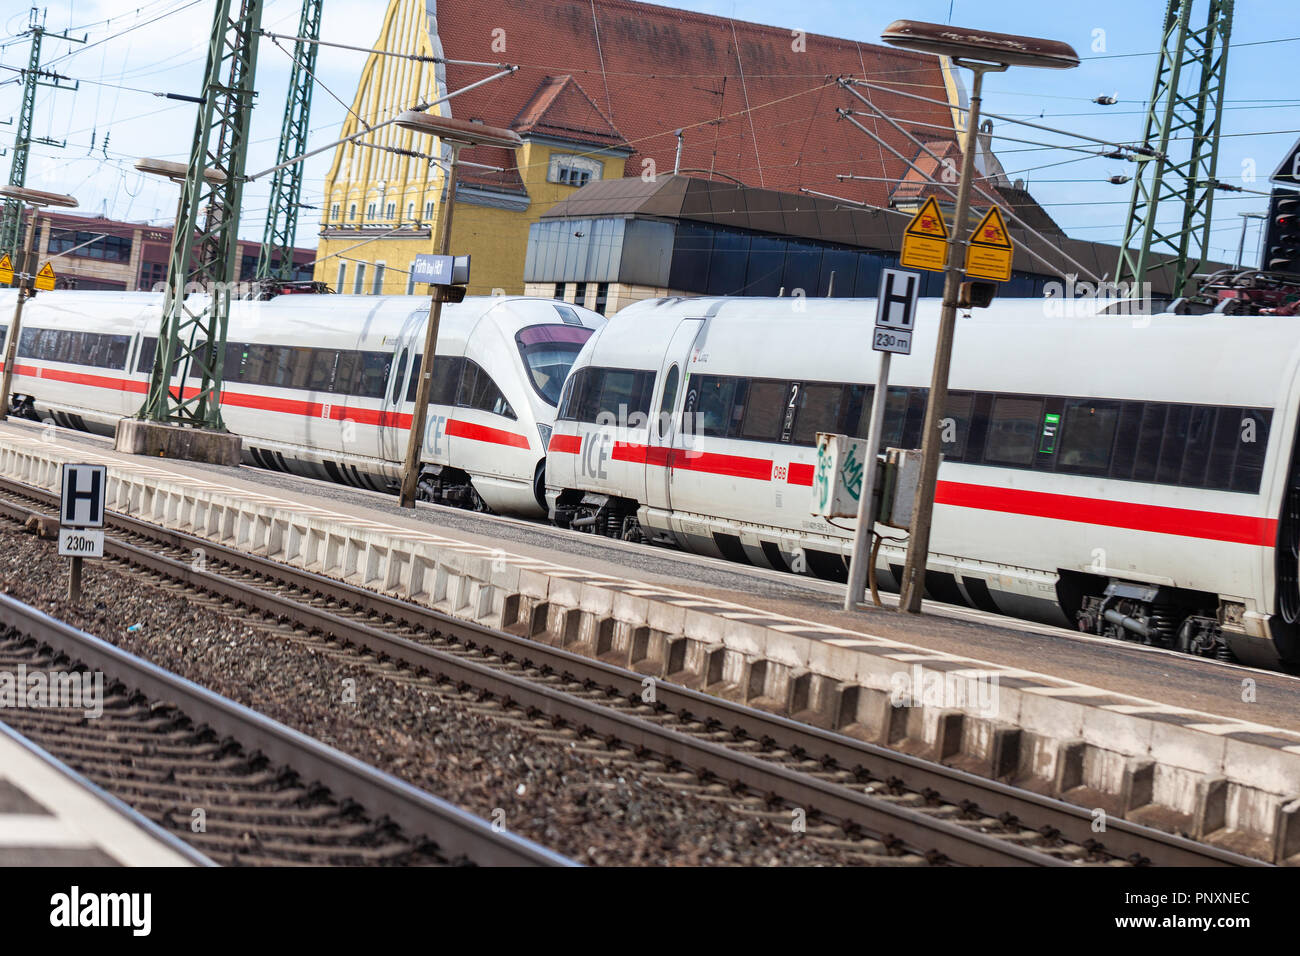 FUERTH / GERMANY - MARCH 11, 2018: ICE 3, intercity-Express train from Deutsche Bahn passes train station fuerth in germany. Stock Photo